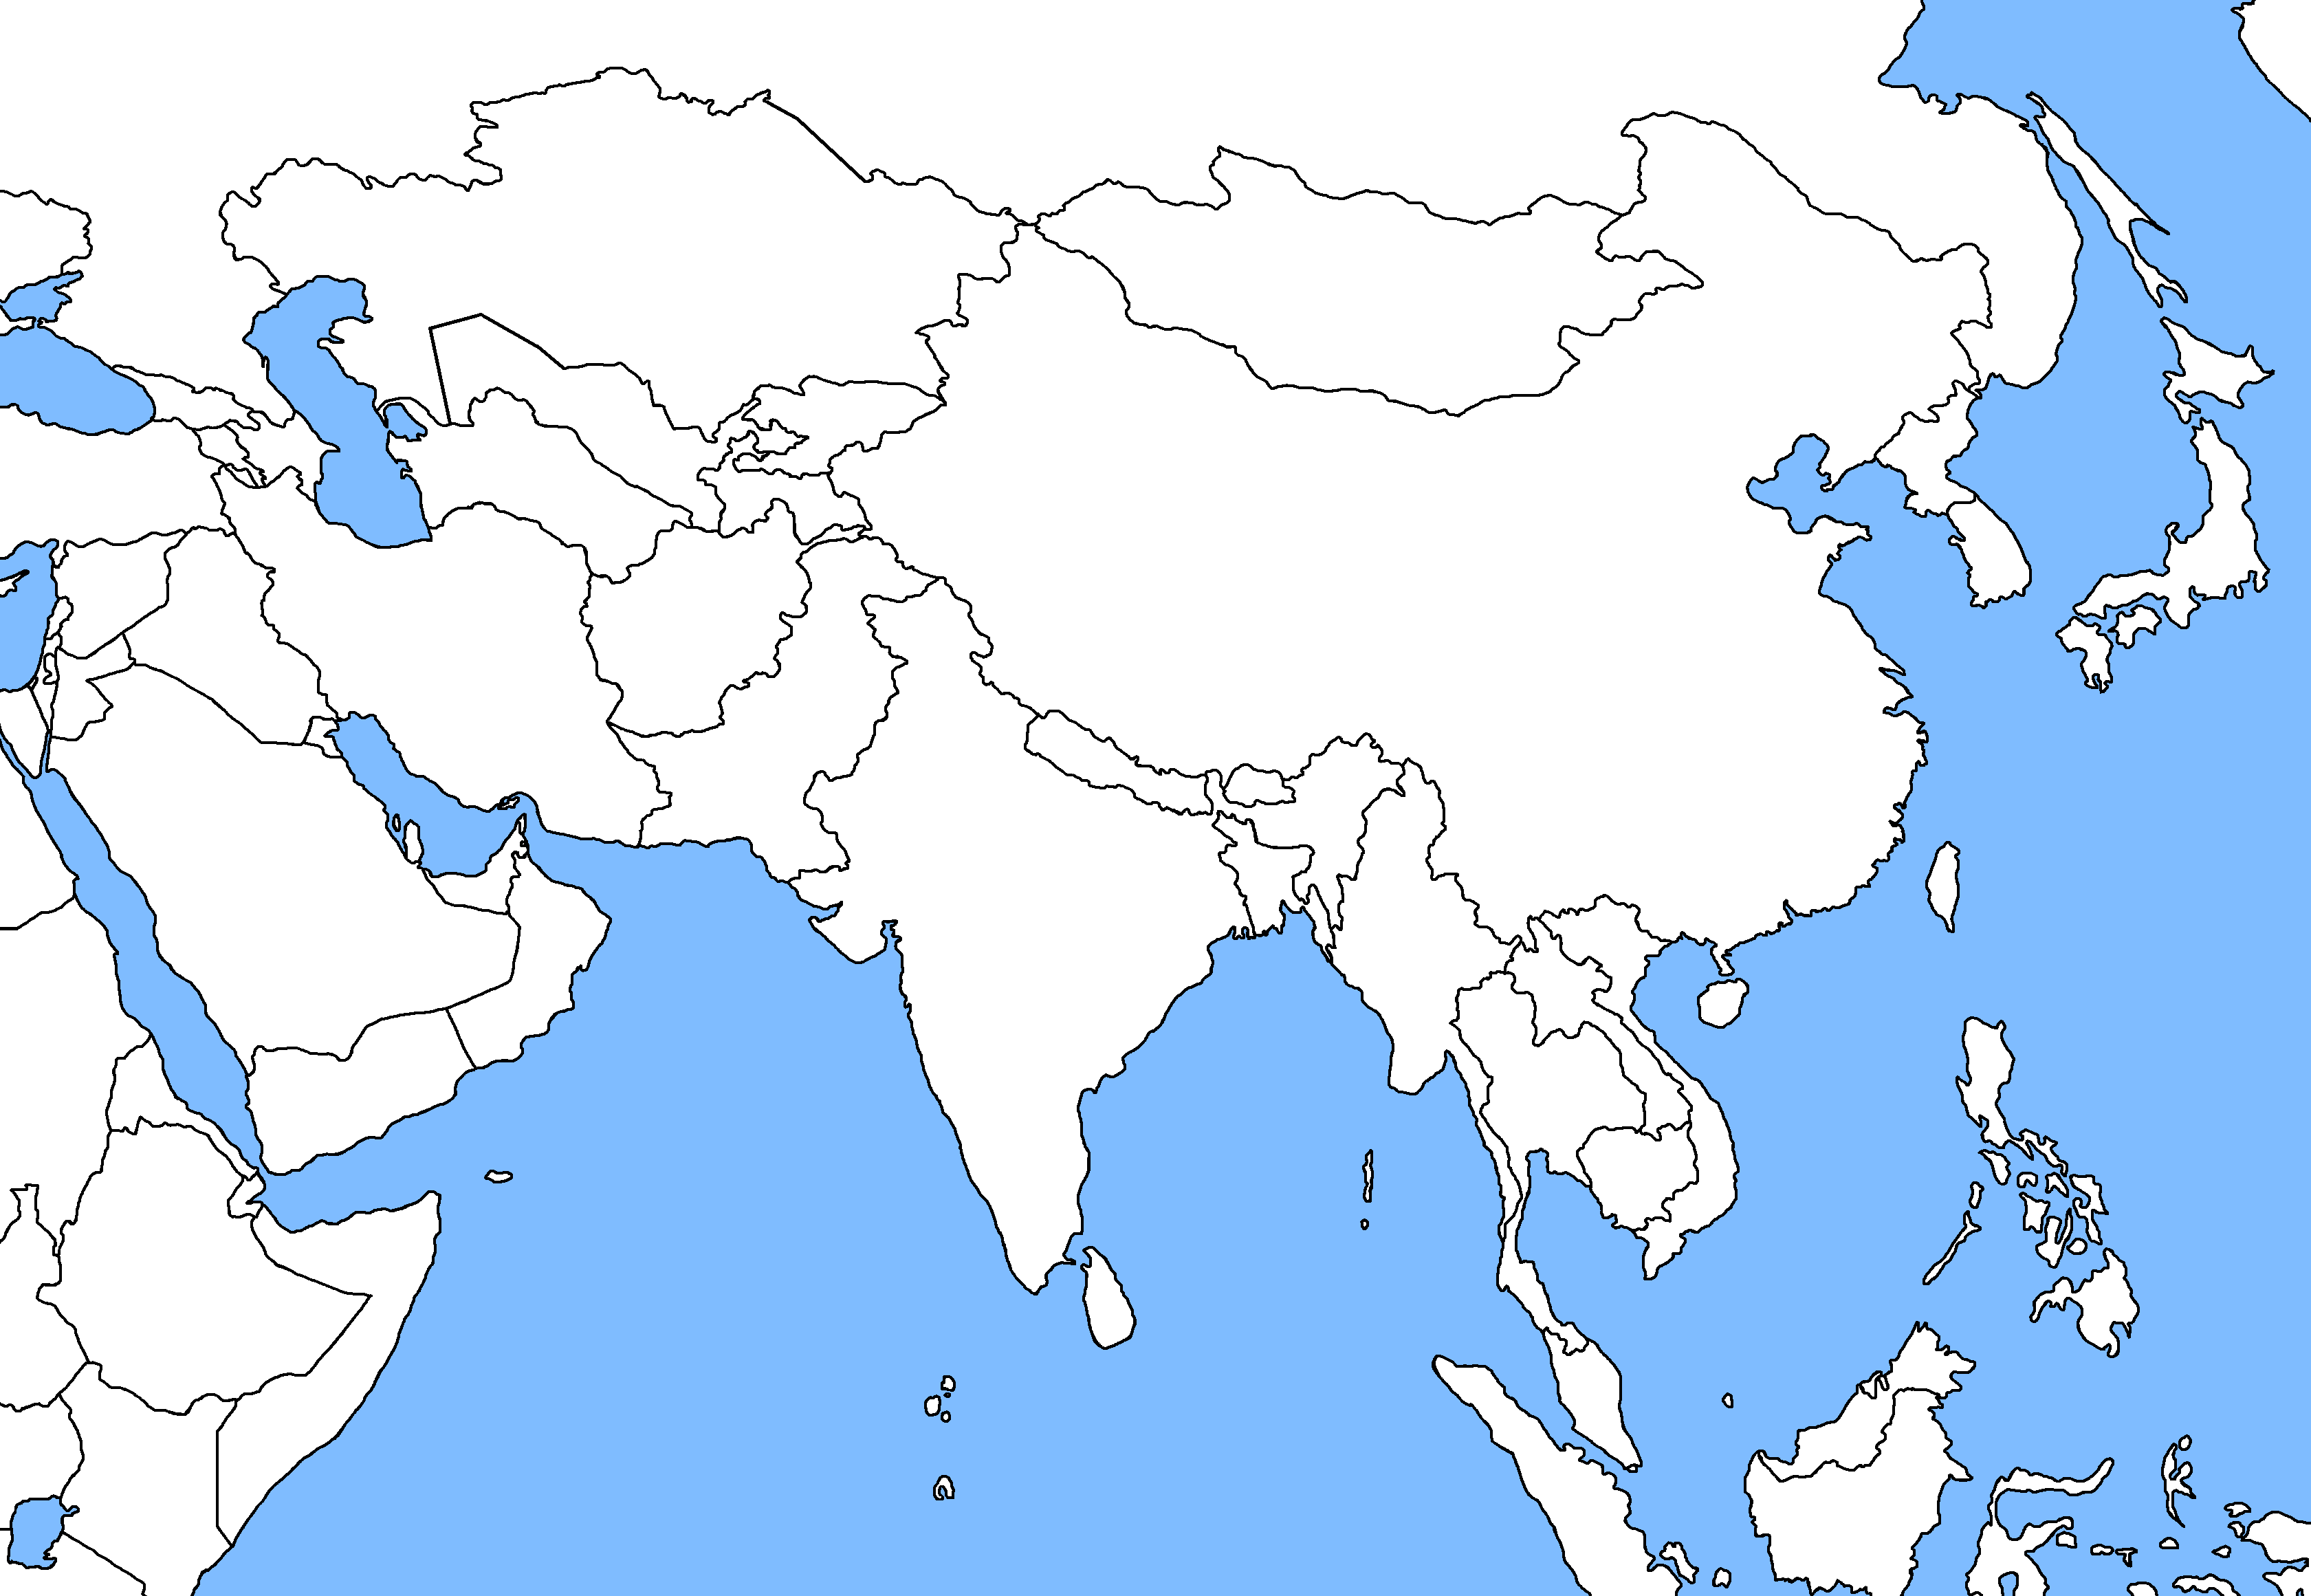 Asia Countries Map Unlabeled 